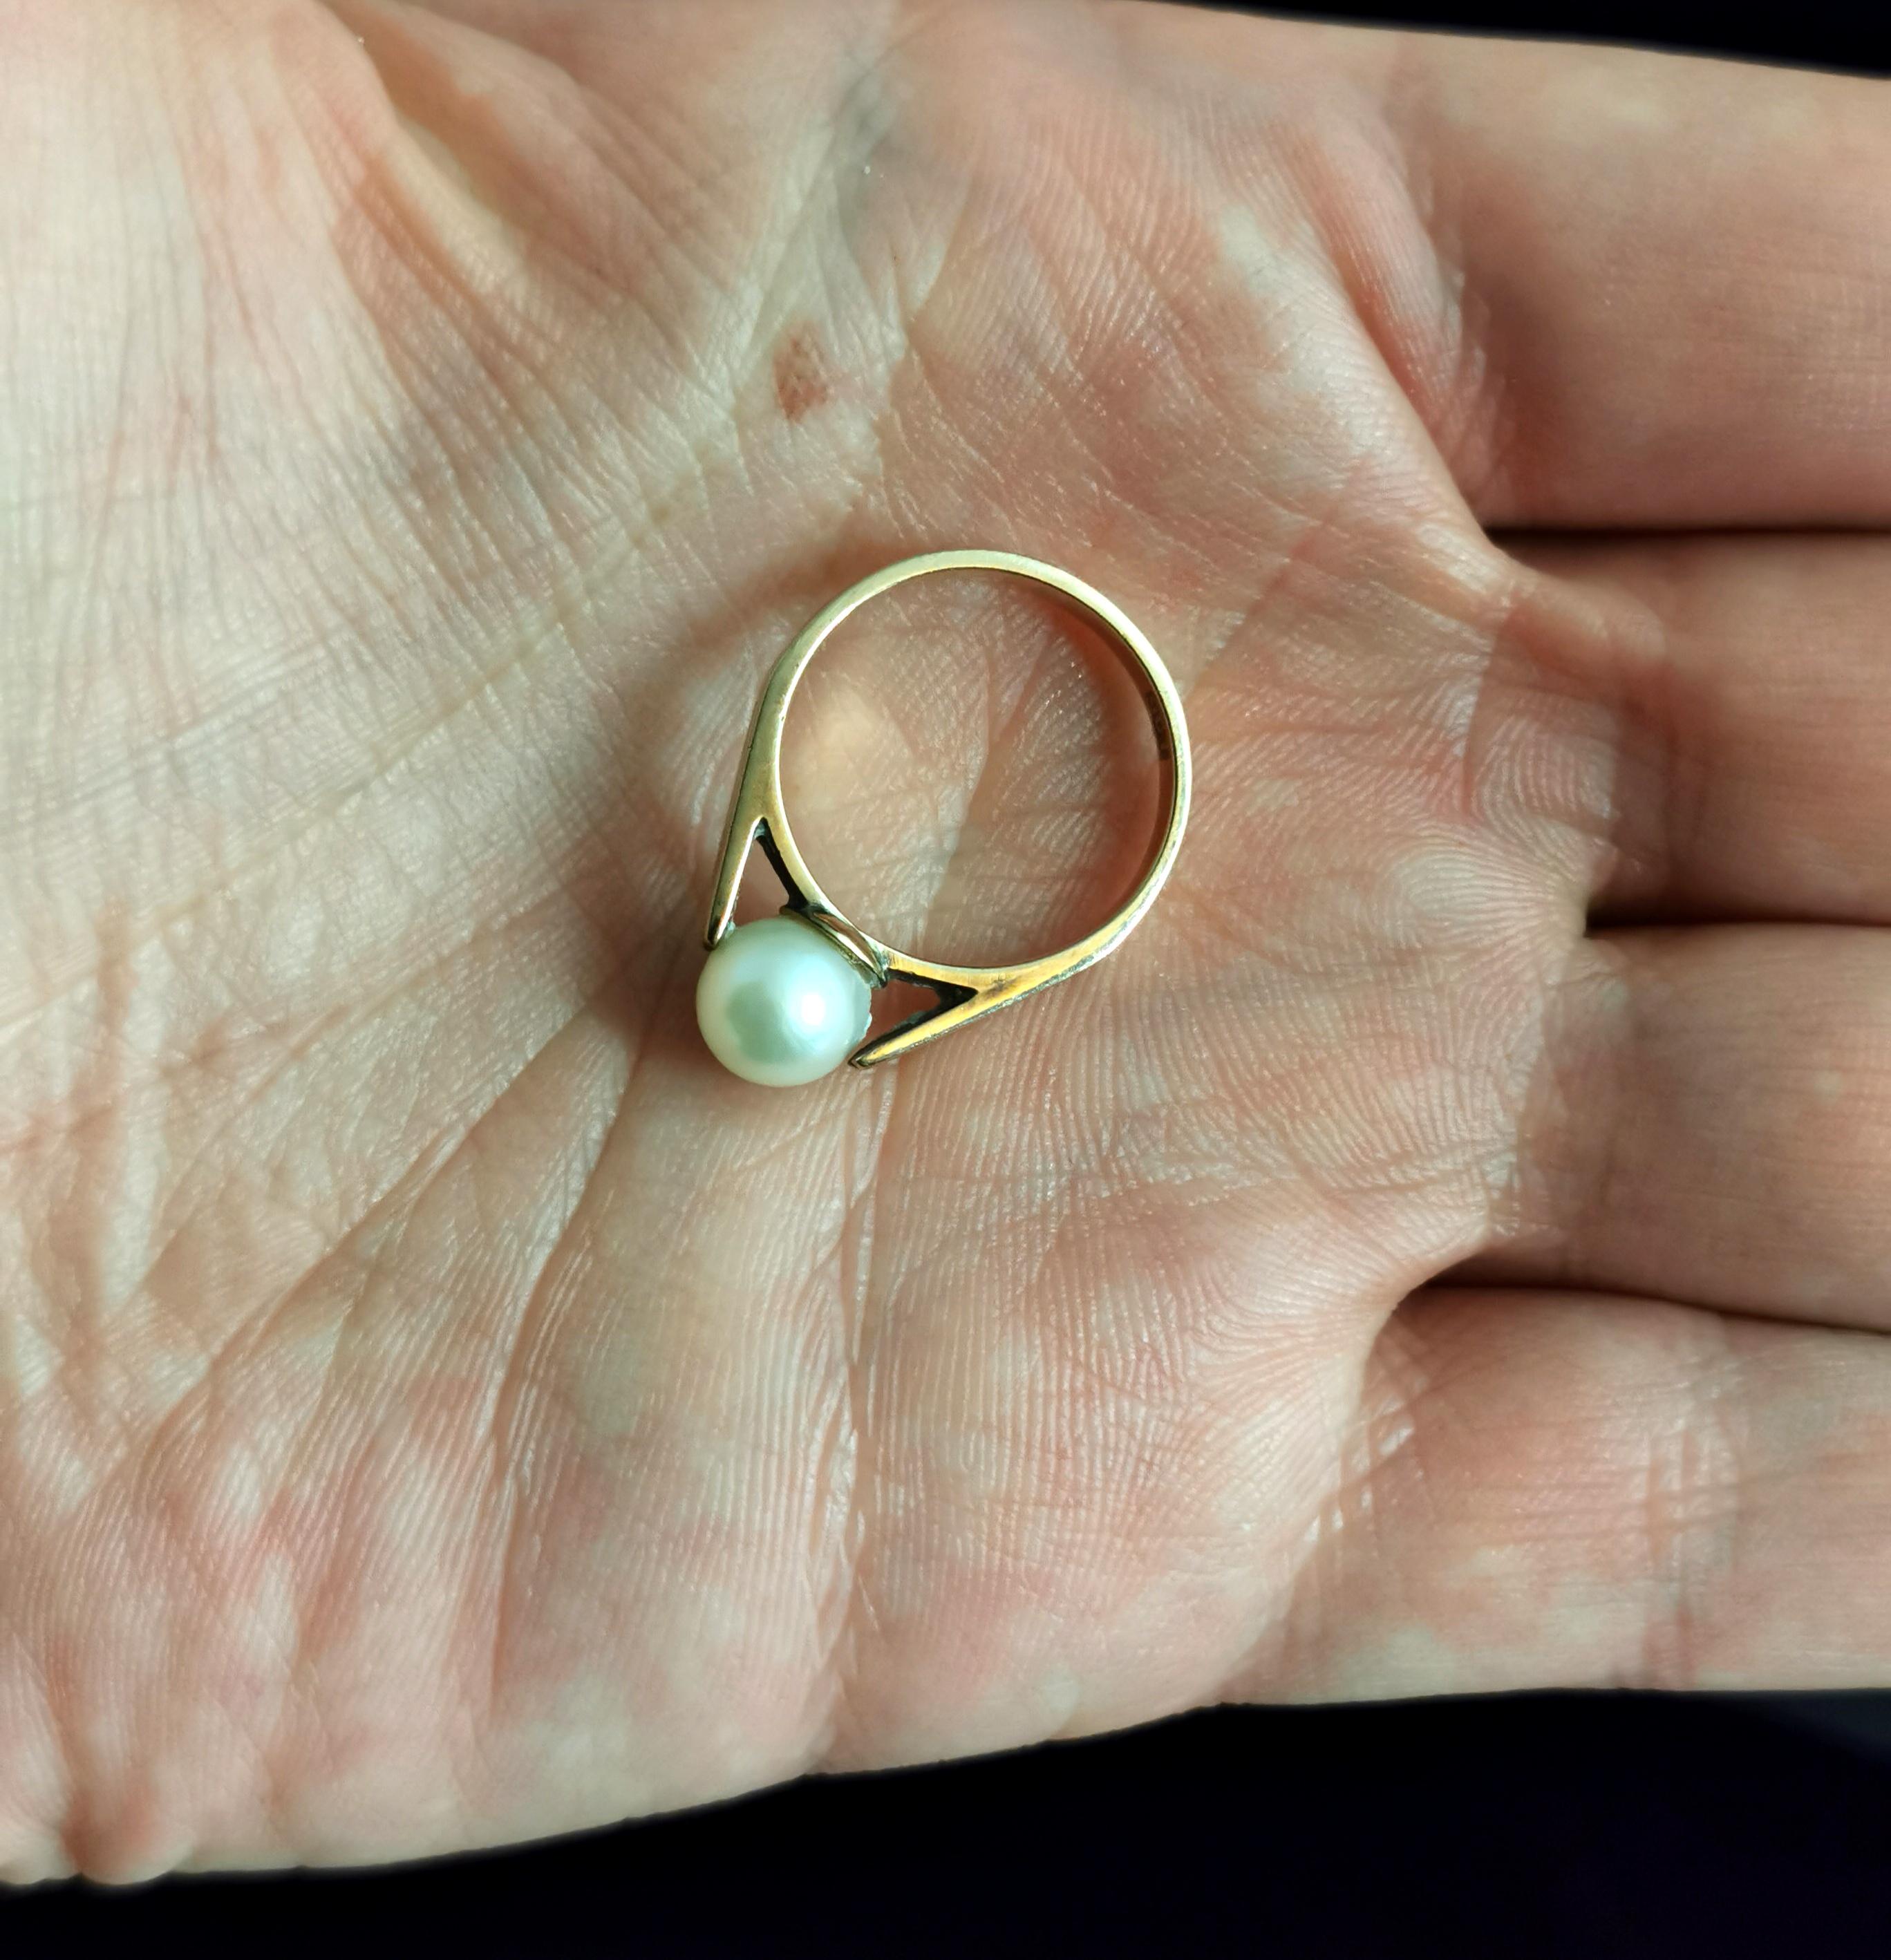 Vintage c1940s Pearl Solitaire Ring, 9 Karat Yellow Gold 3